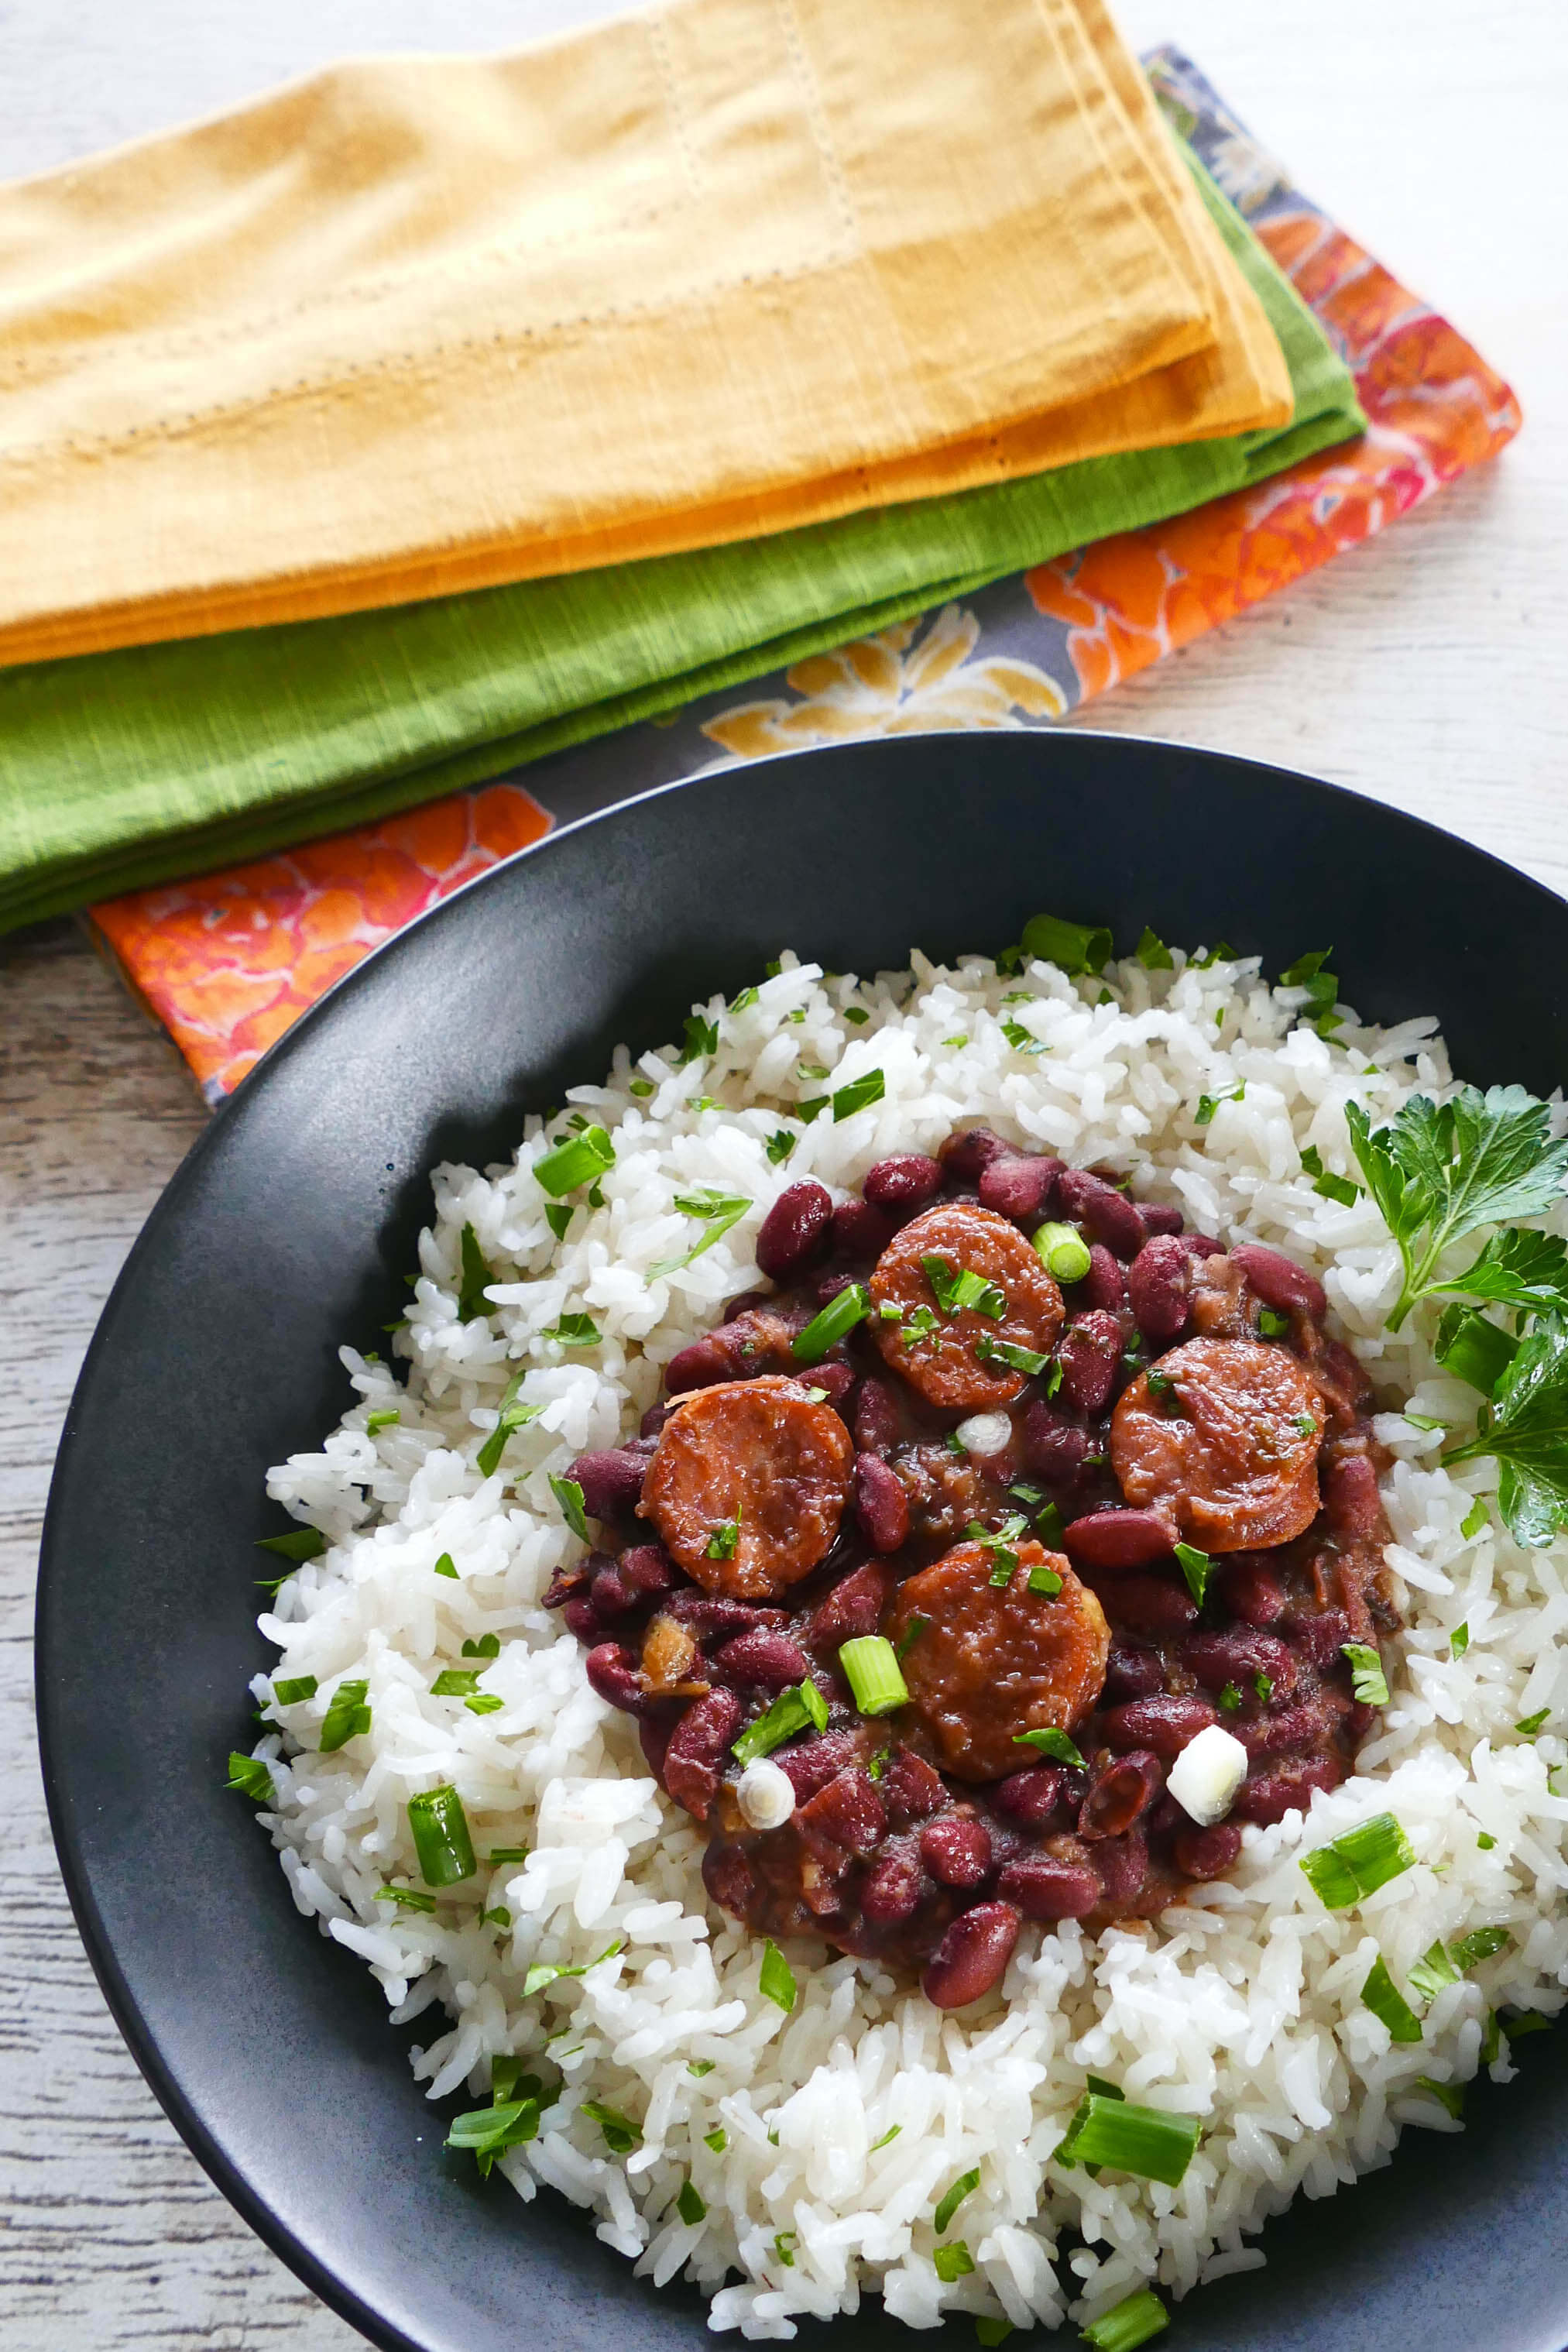 Instant Pot Red Beans and Rice - Beans and sausage served on rice in a black bowl on a white wooden background with multicolor napkins. Garnished with parsley and green onions - Paint the Kitchen Red